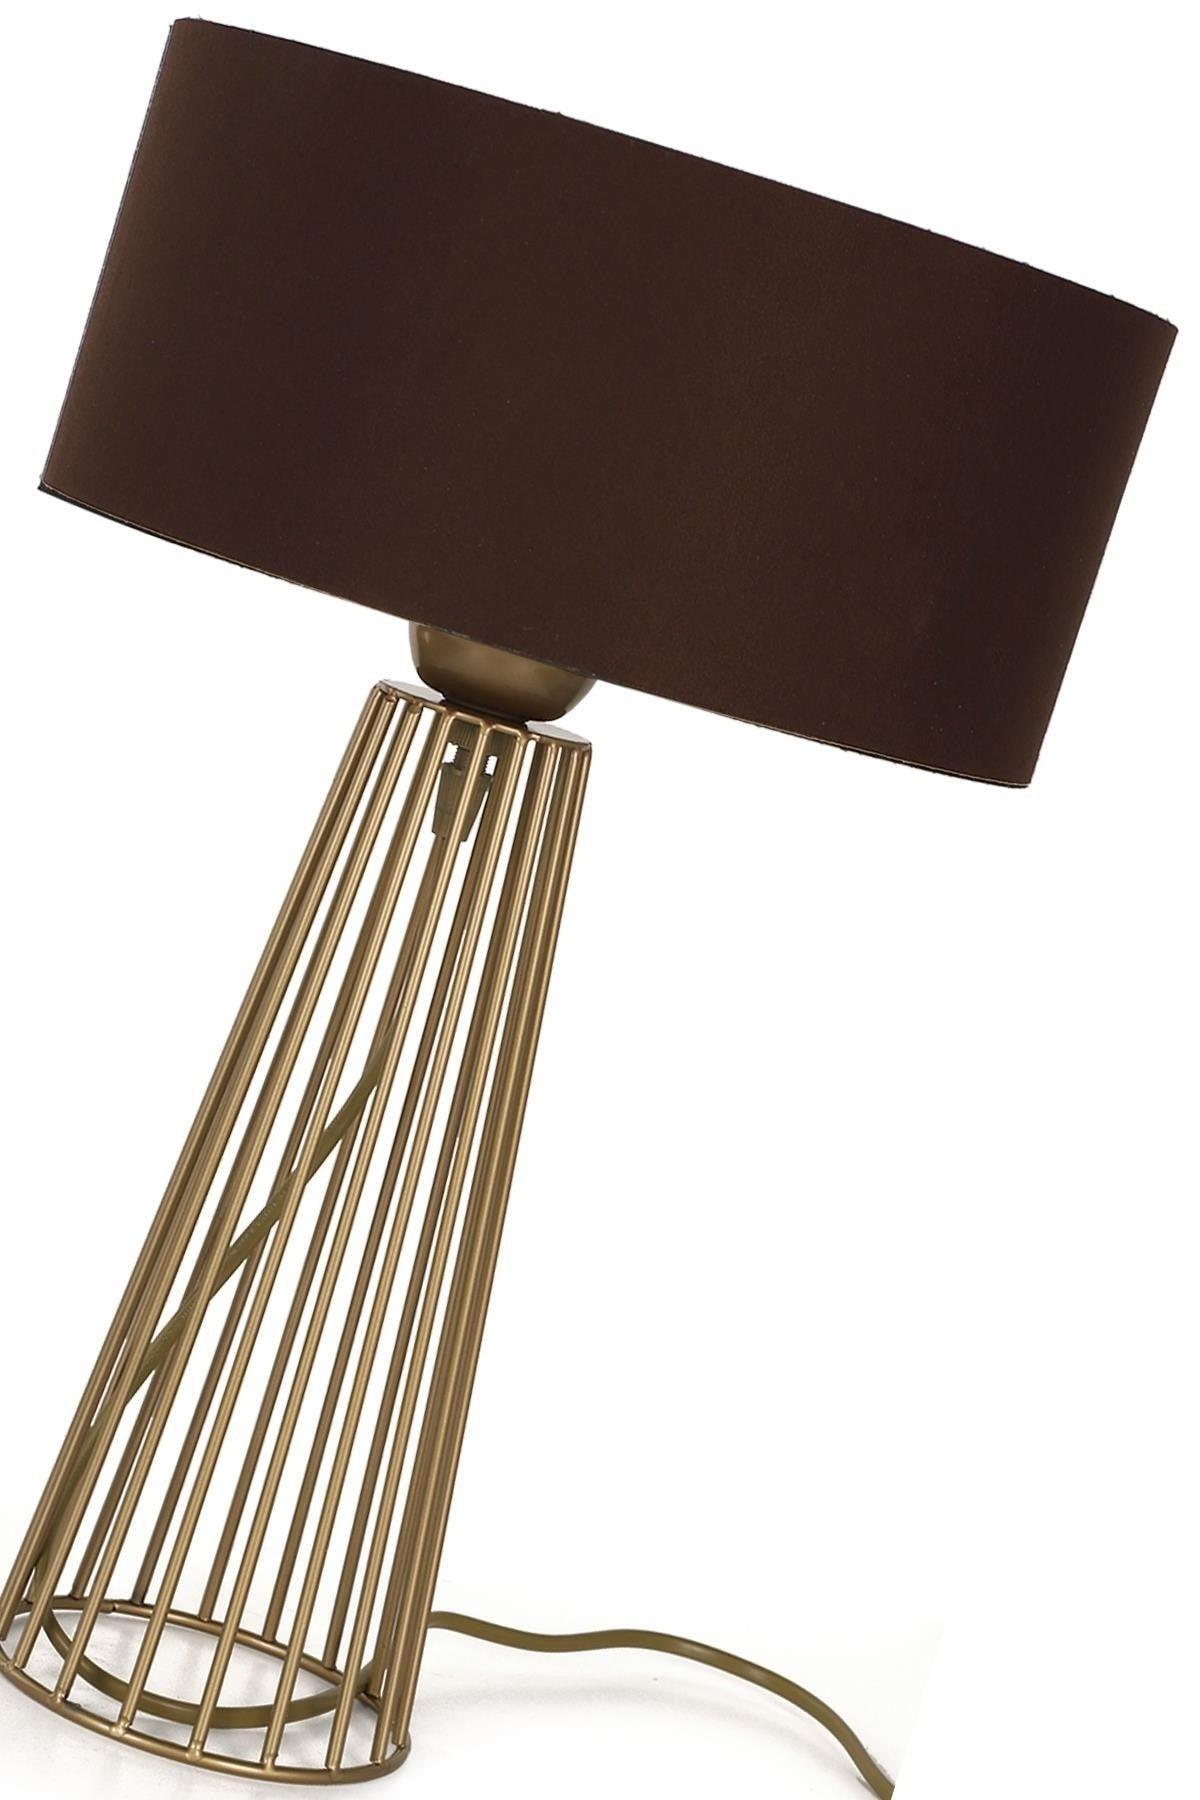 Philippine Table Lamp Tumbled Brown Hat - Swordslife